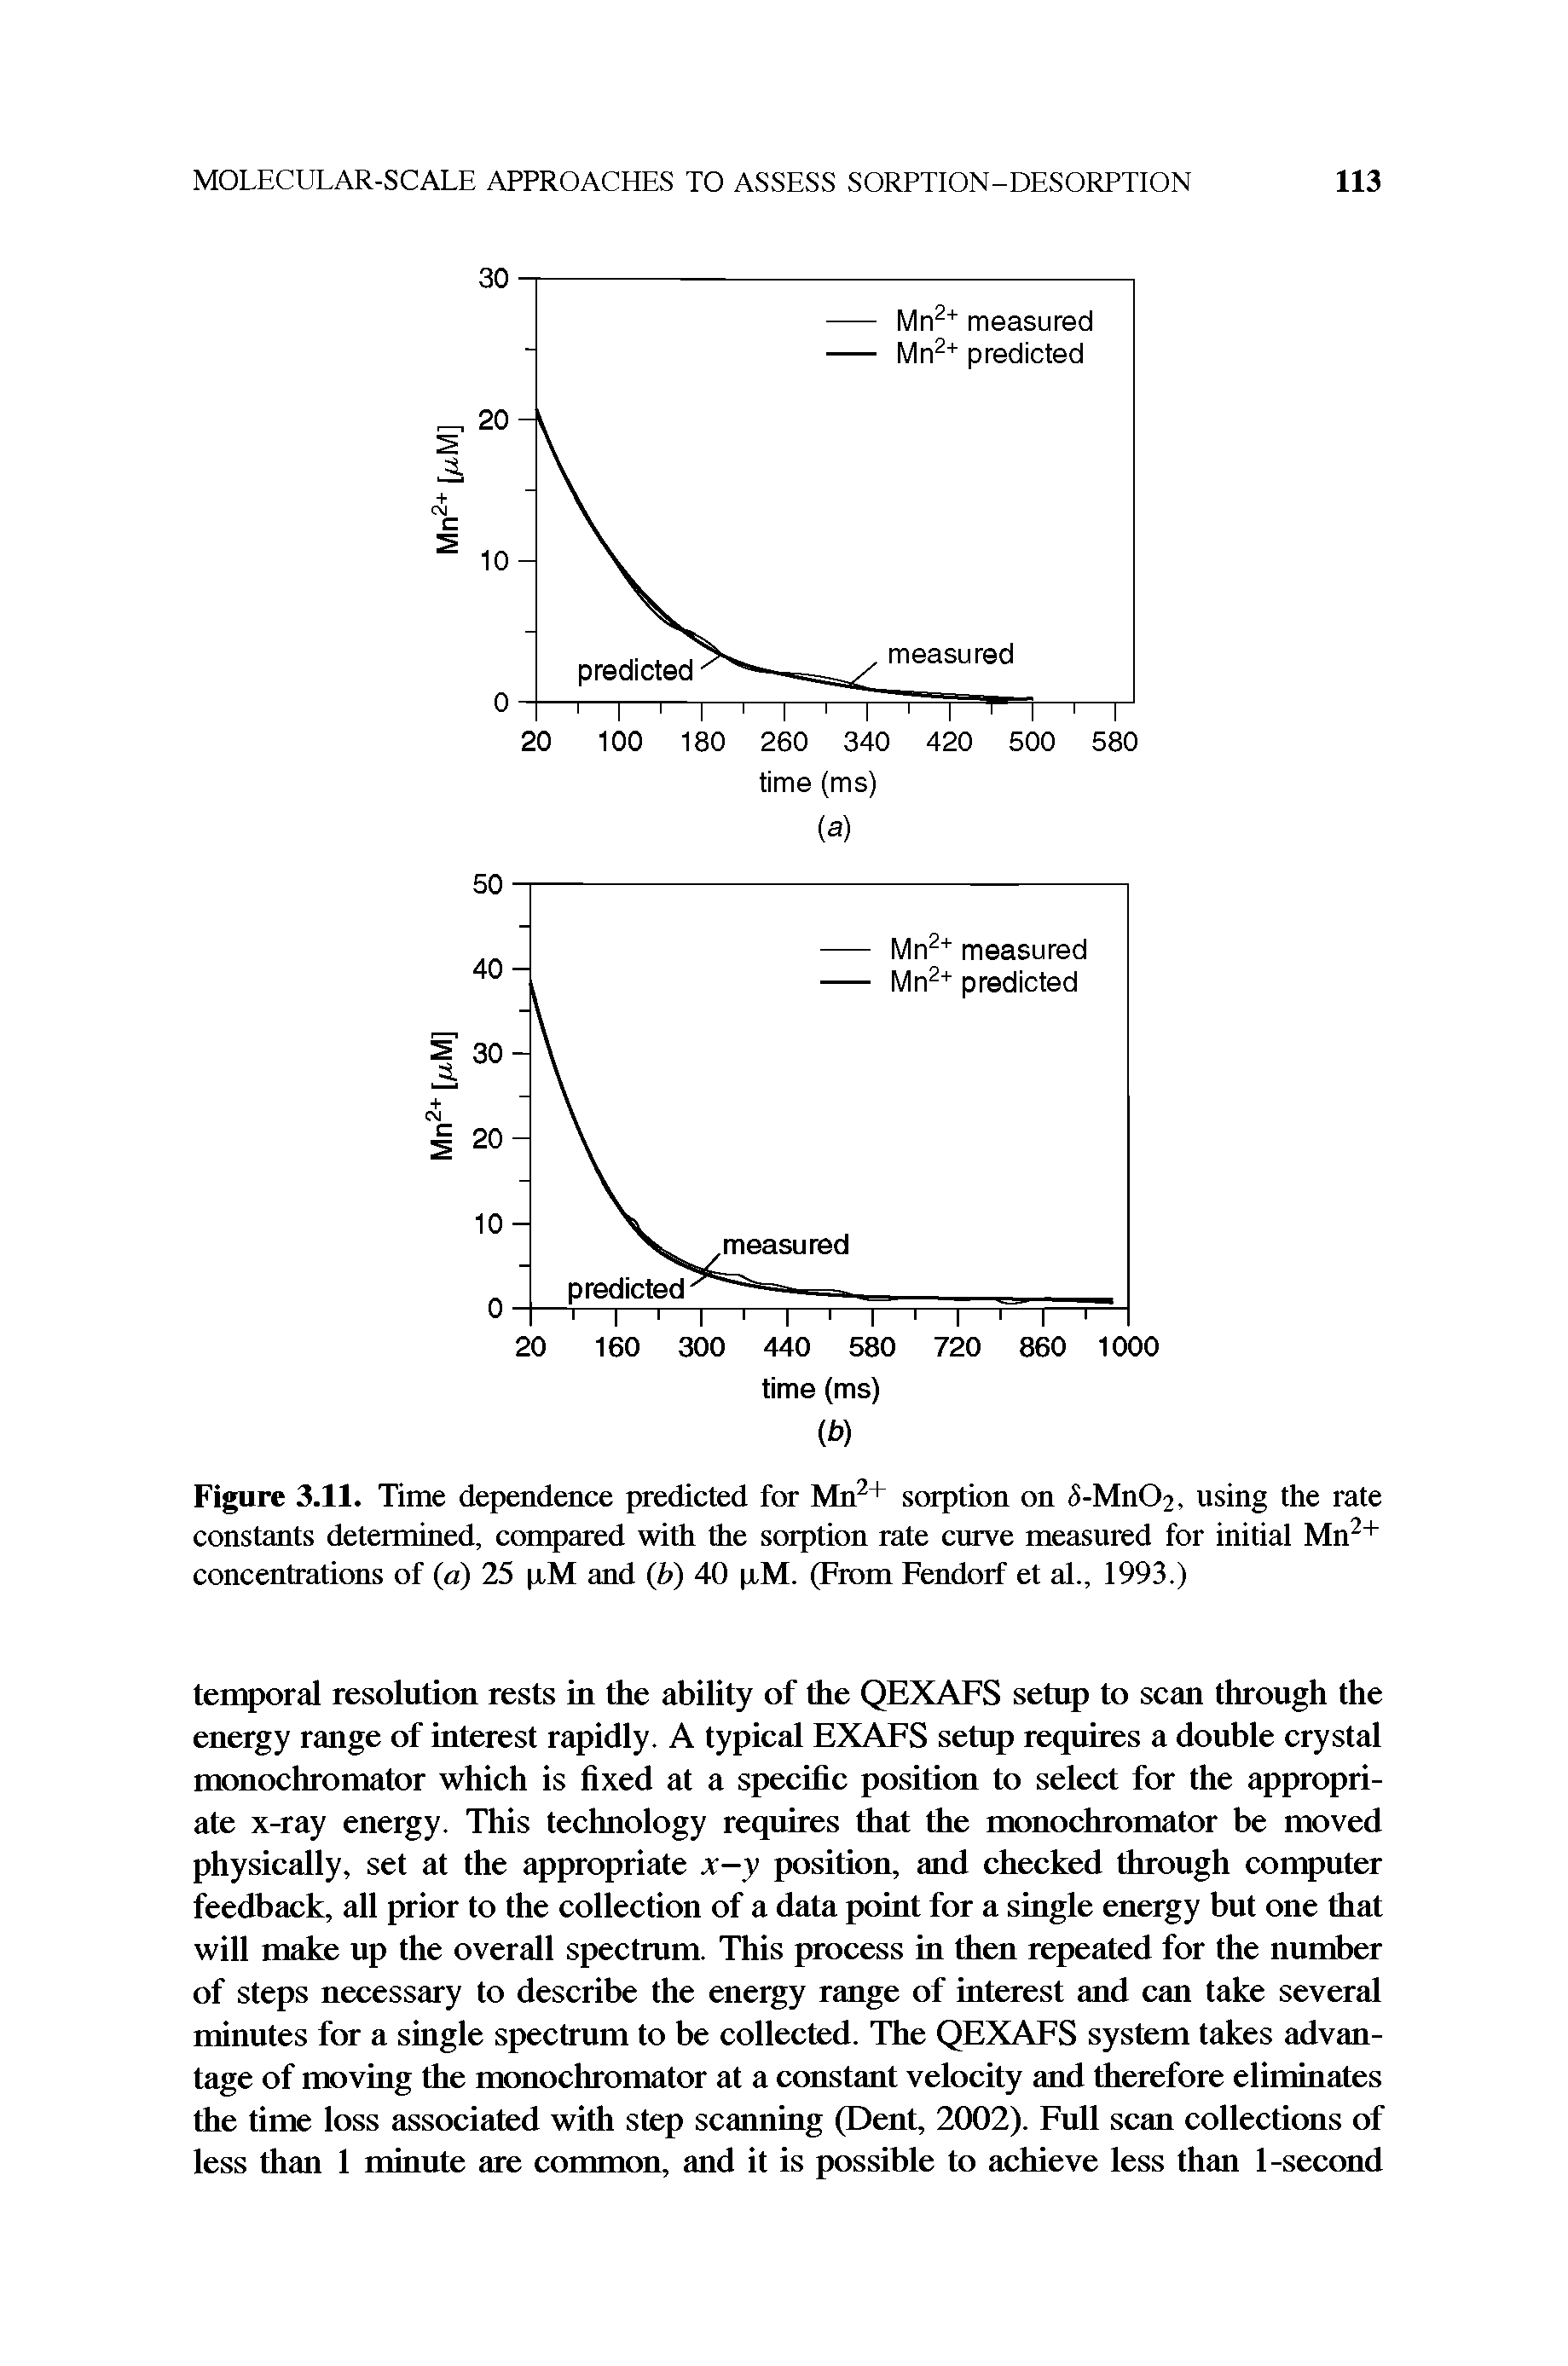 Figure 3.11. Time dependence predicted for Mn sorption on -MnO , using the rate constants determined, compared with the sorption rate curve measured for initial Mn"+ concentrations of (a) 25 piM and ( ) 40 piM. (From Fendorf et al., 1993.)...